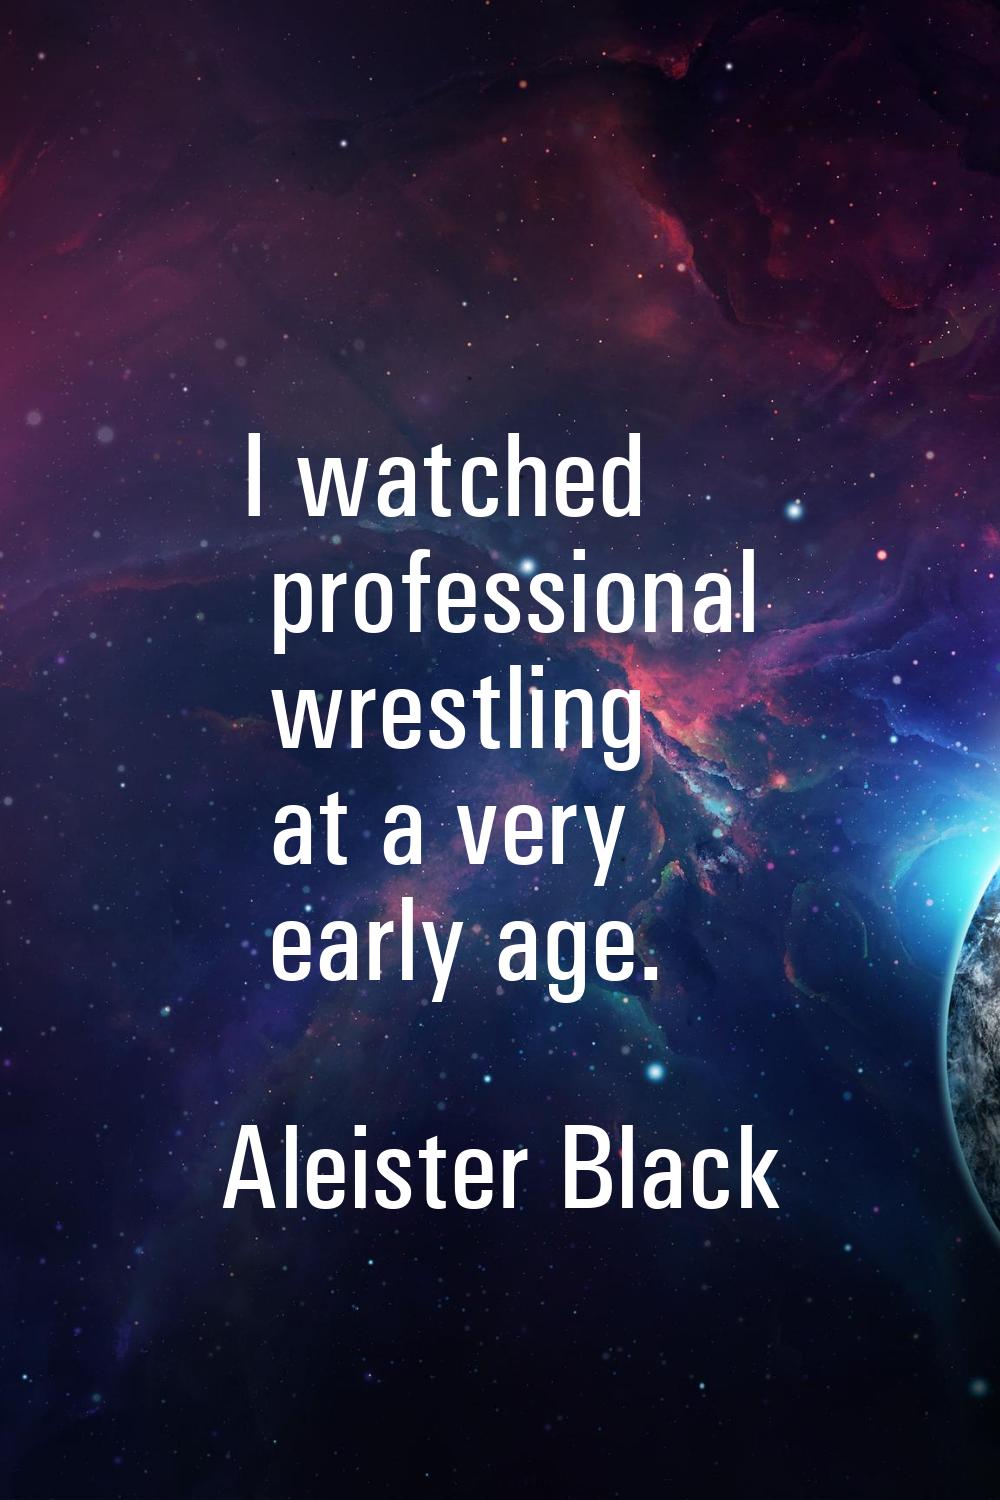 I watched professional wrestling at a very early age.